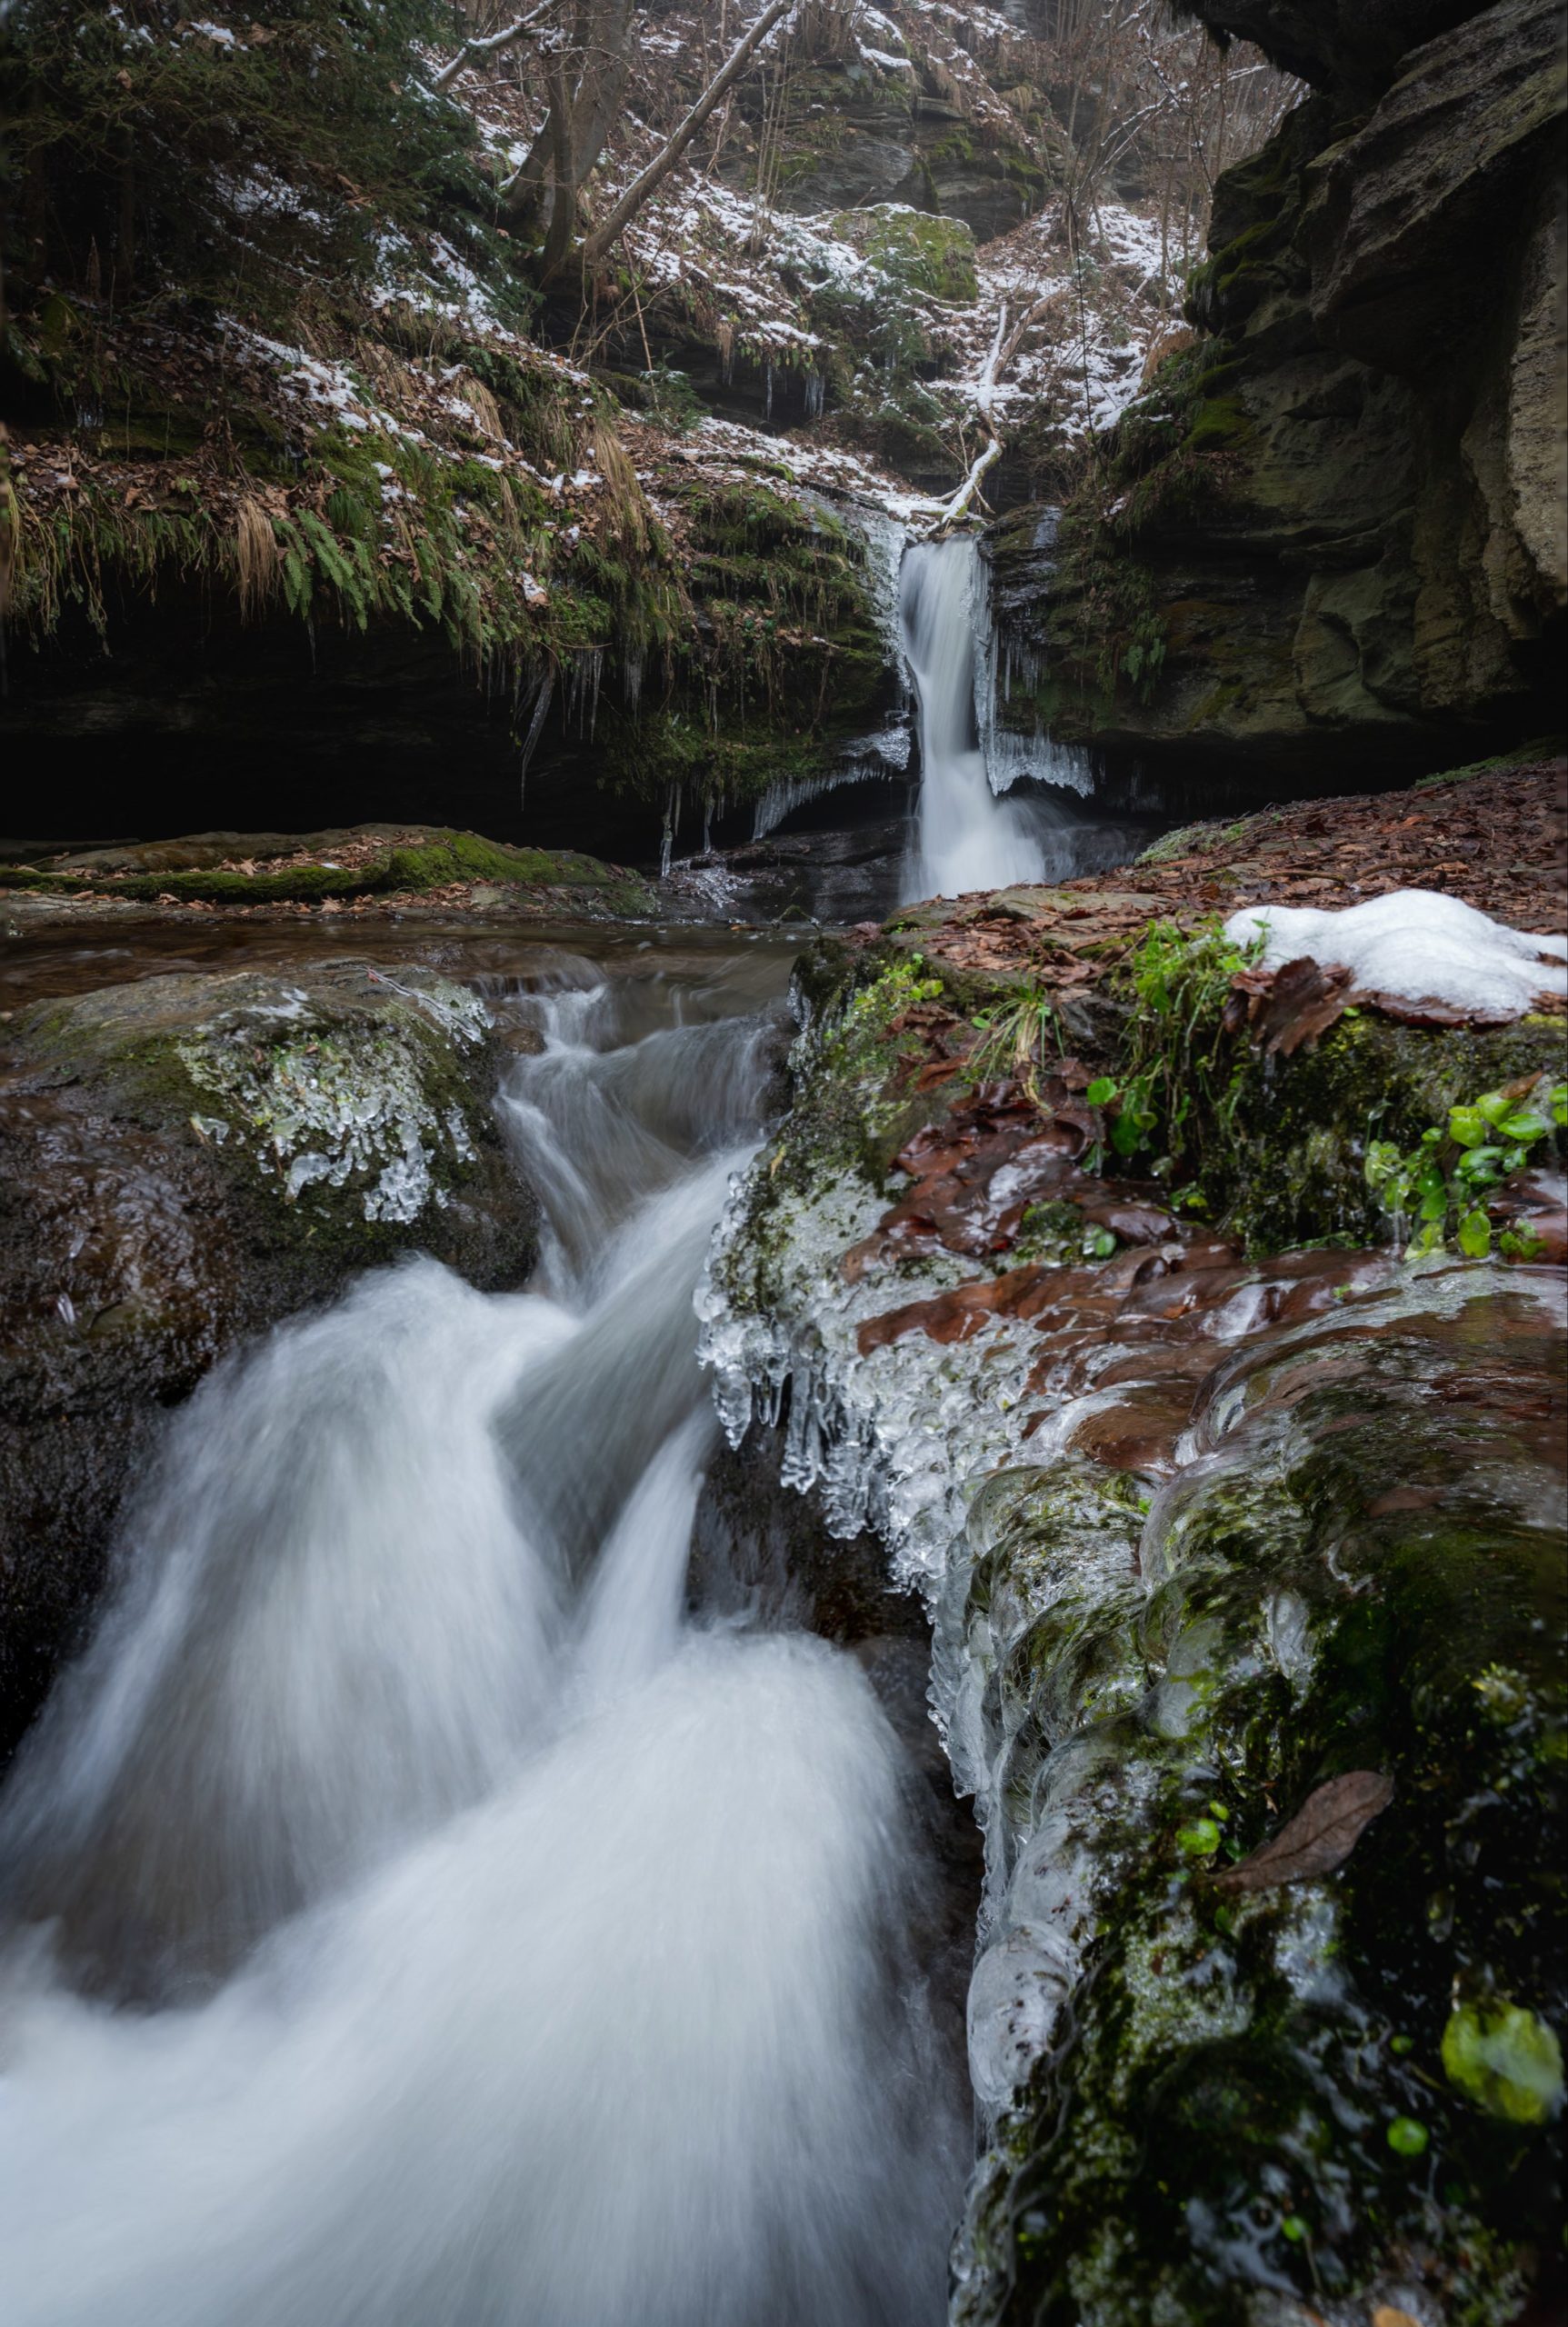 Small waterfalls along the Sörger waterfall trail in the depths of winter, Carinthia, Austria